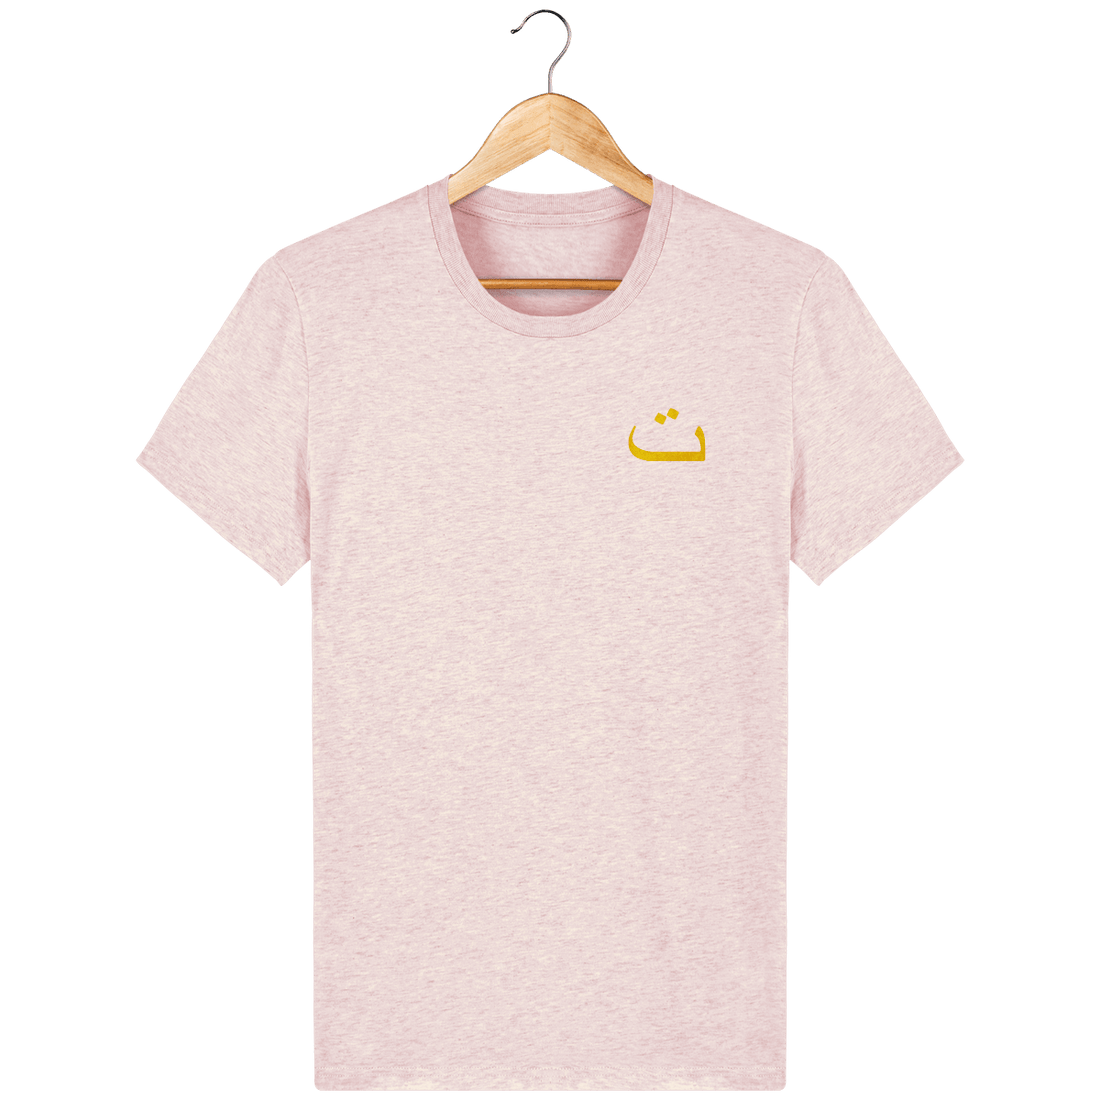 Unisexe>Tee-shirts - T-Shirt Homme <br> Lettre Arabe Taa